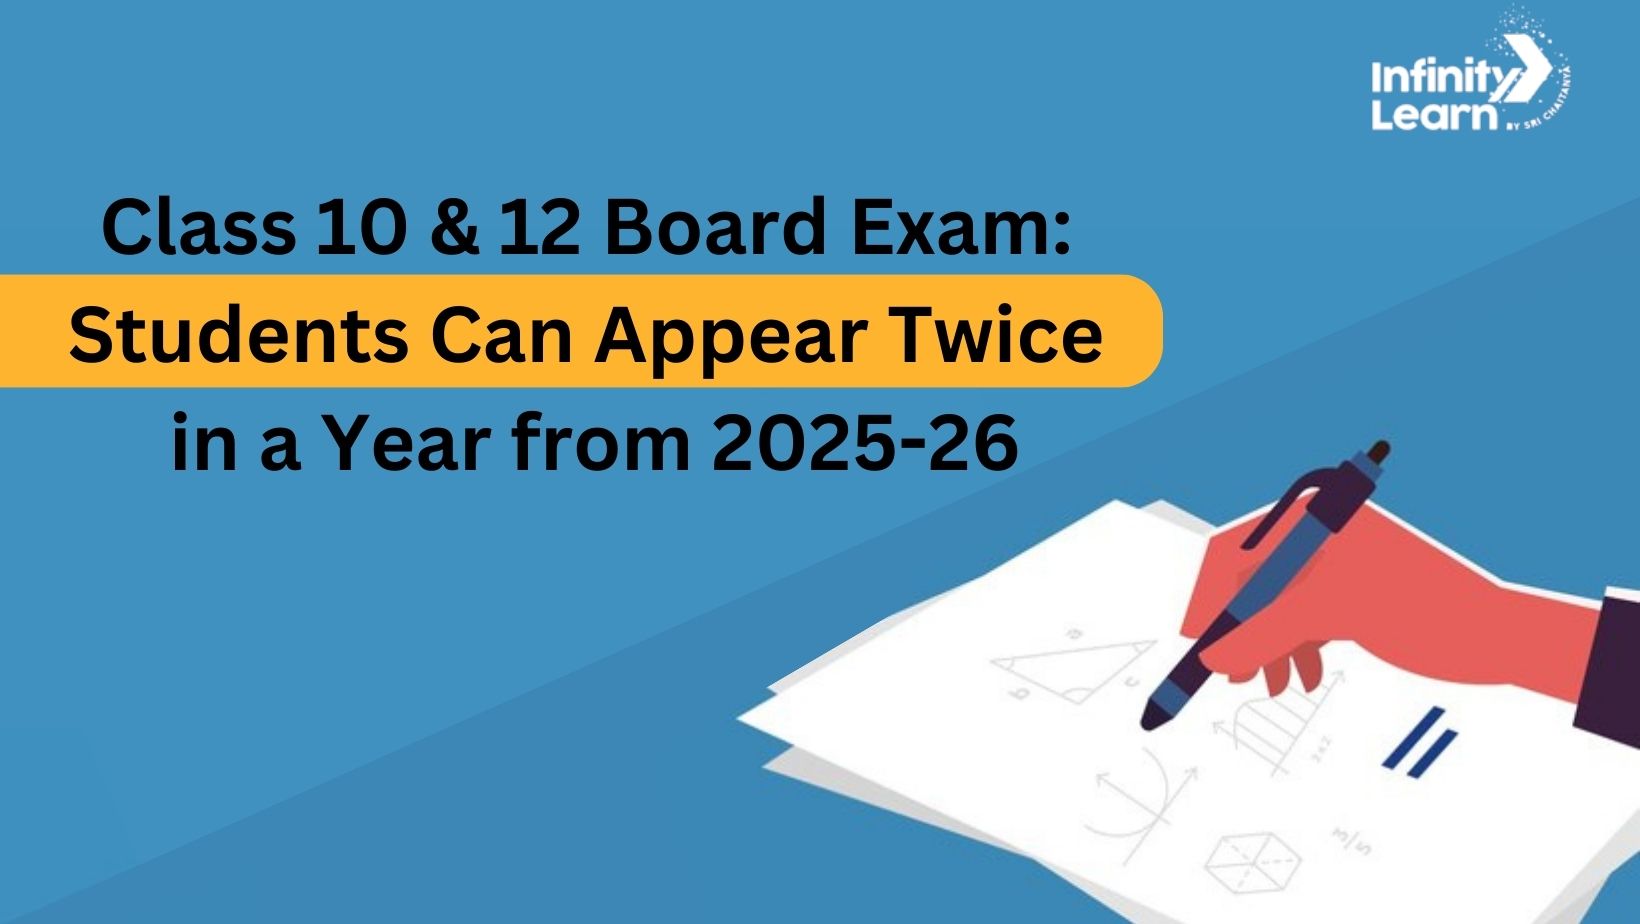 Class 10 & 12 Board Exam: Students Can Appear Twice in a Year from 2025-26